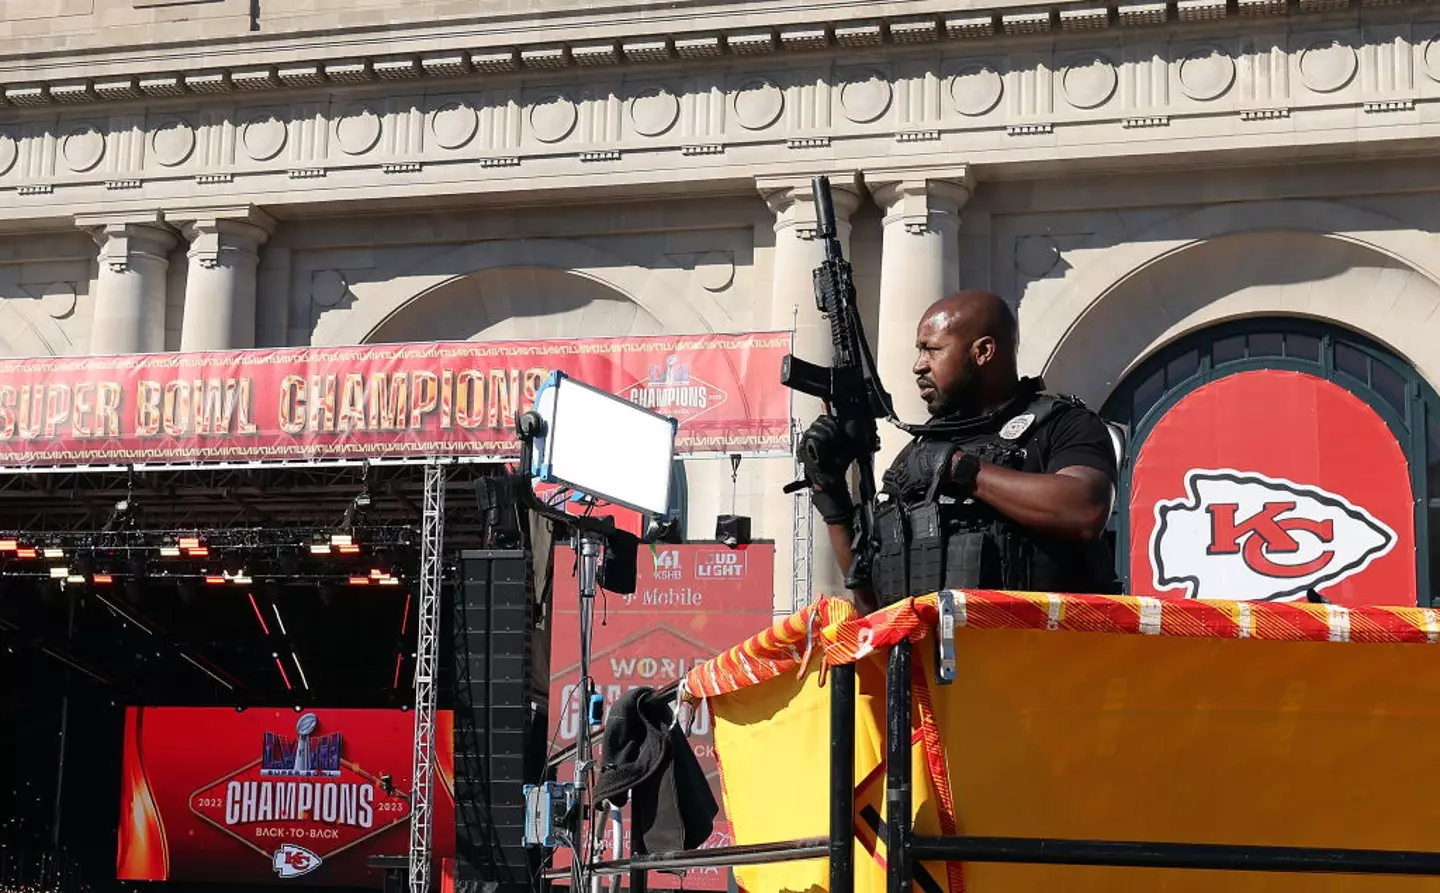 One person was killed and 21 others were injured during the Super Bowl parade.